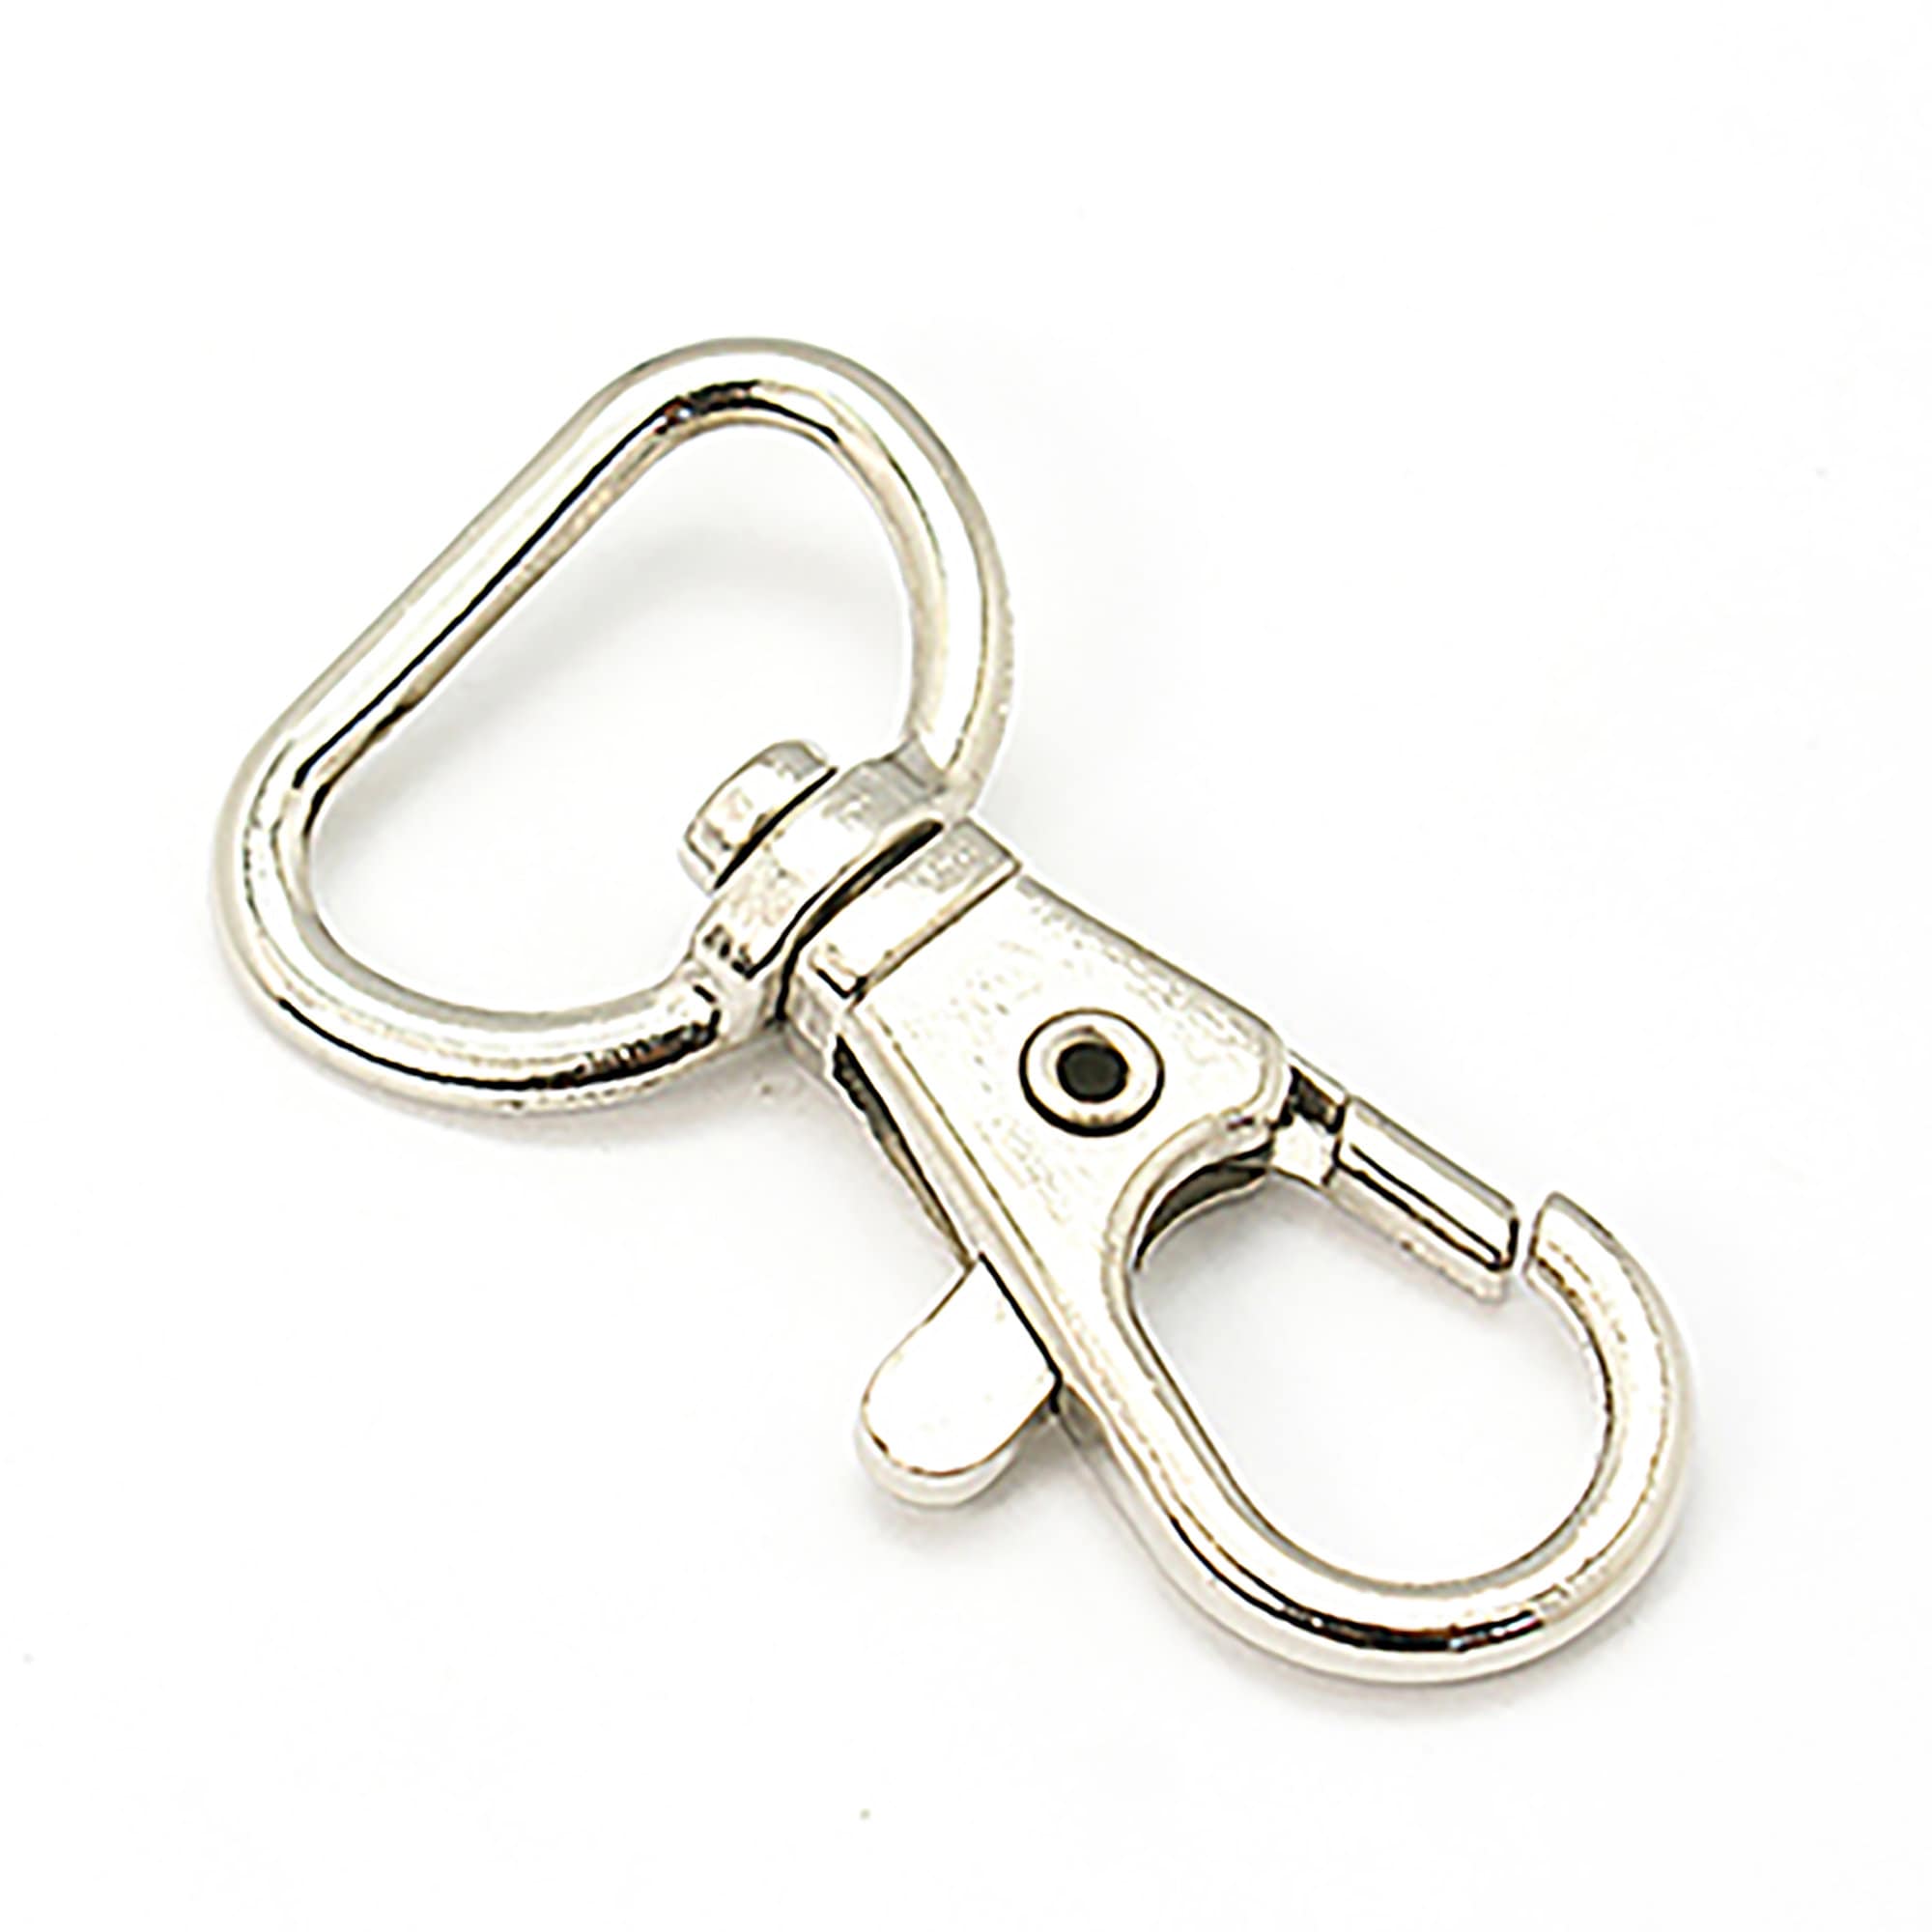 10pcs. Iron Swivel Lobster Claw Clasps for Lanyard, Swivel Snap Hooks for  Keychain and Sewing Project, Snap Hook for Keychain 